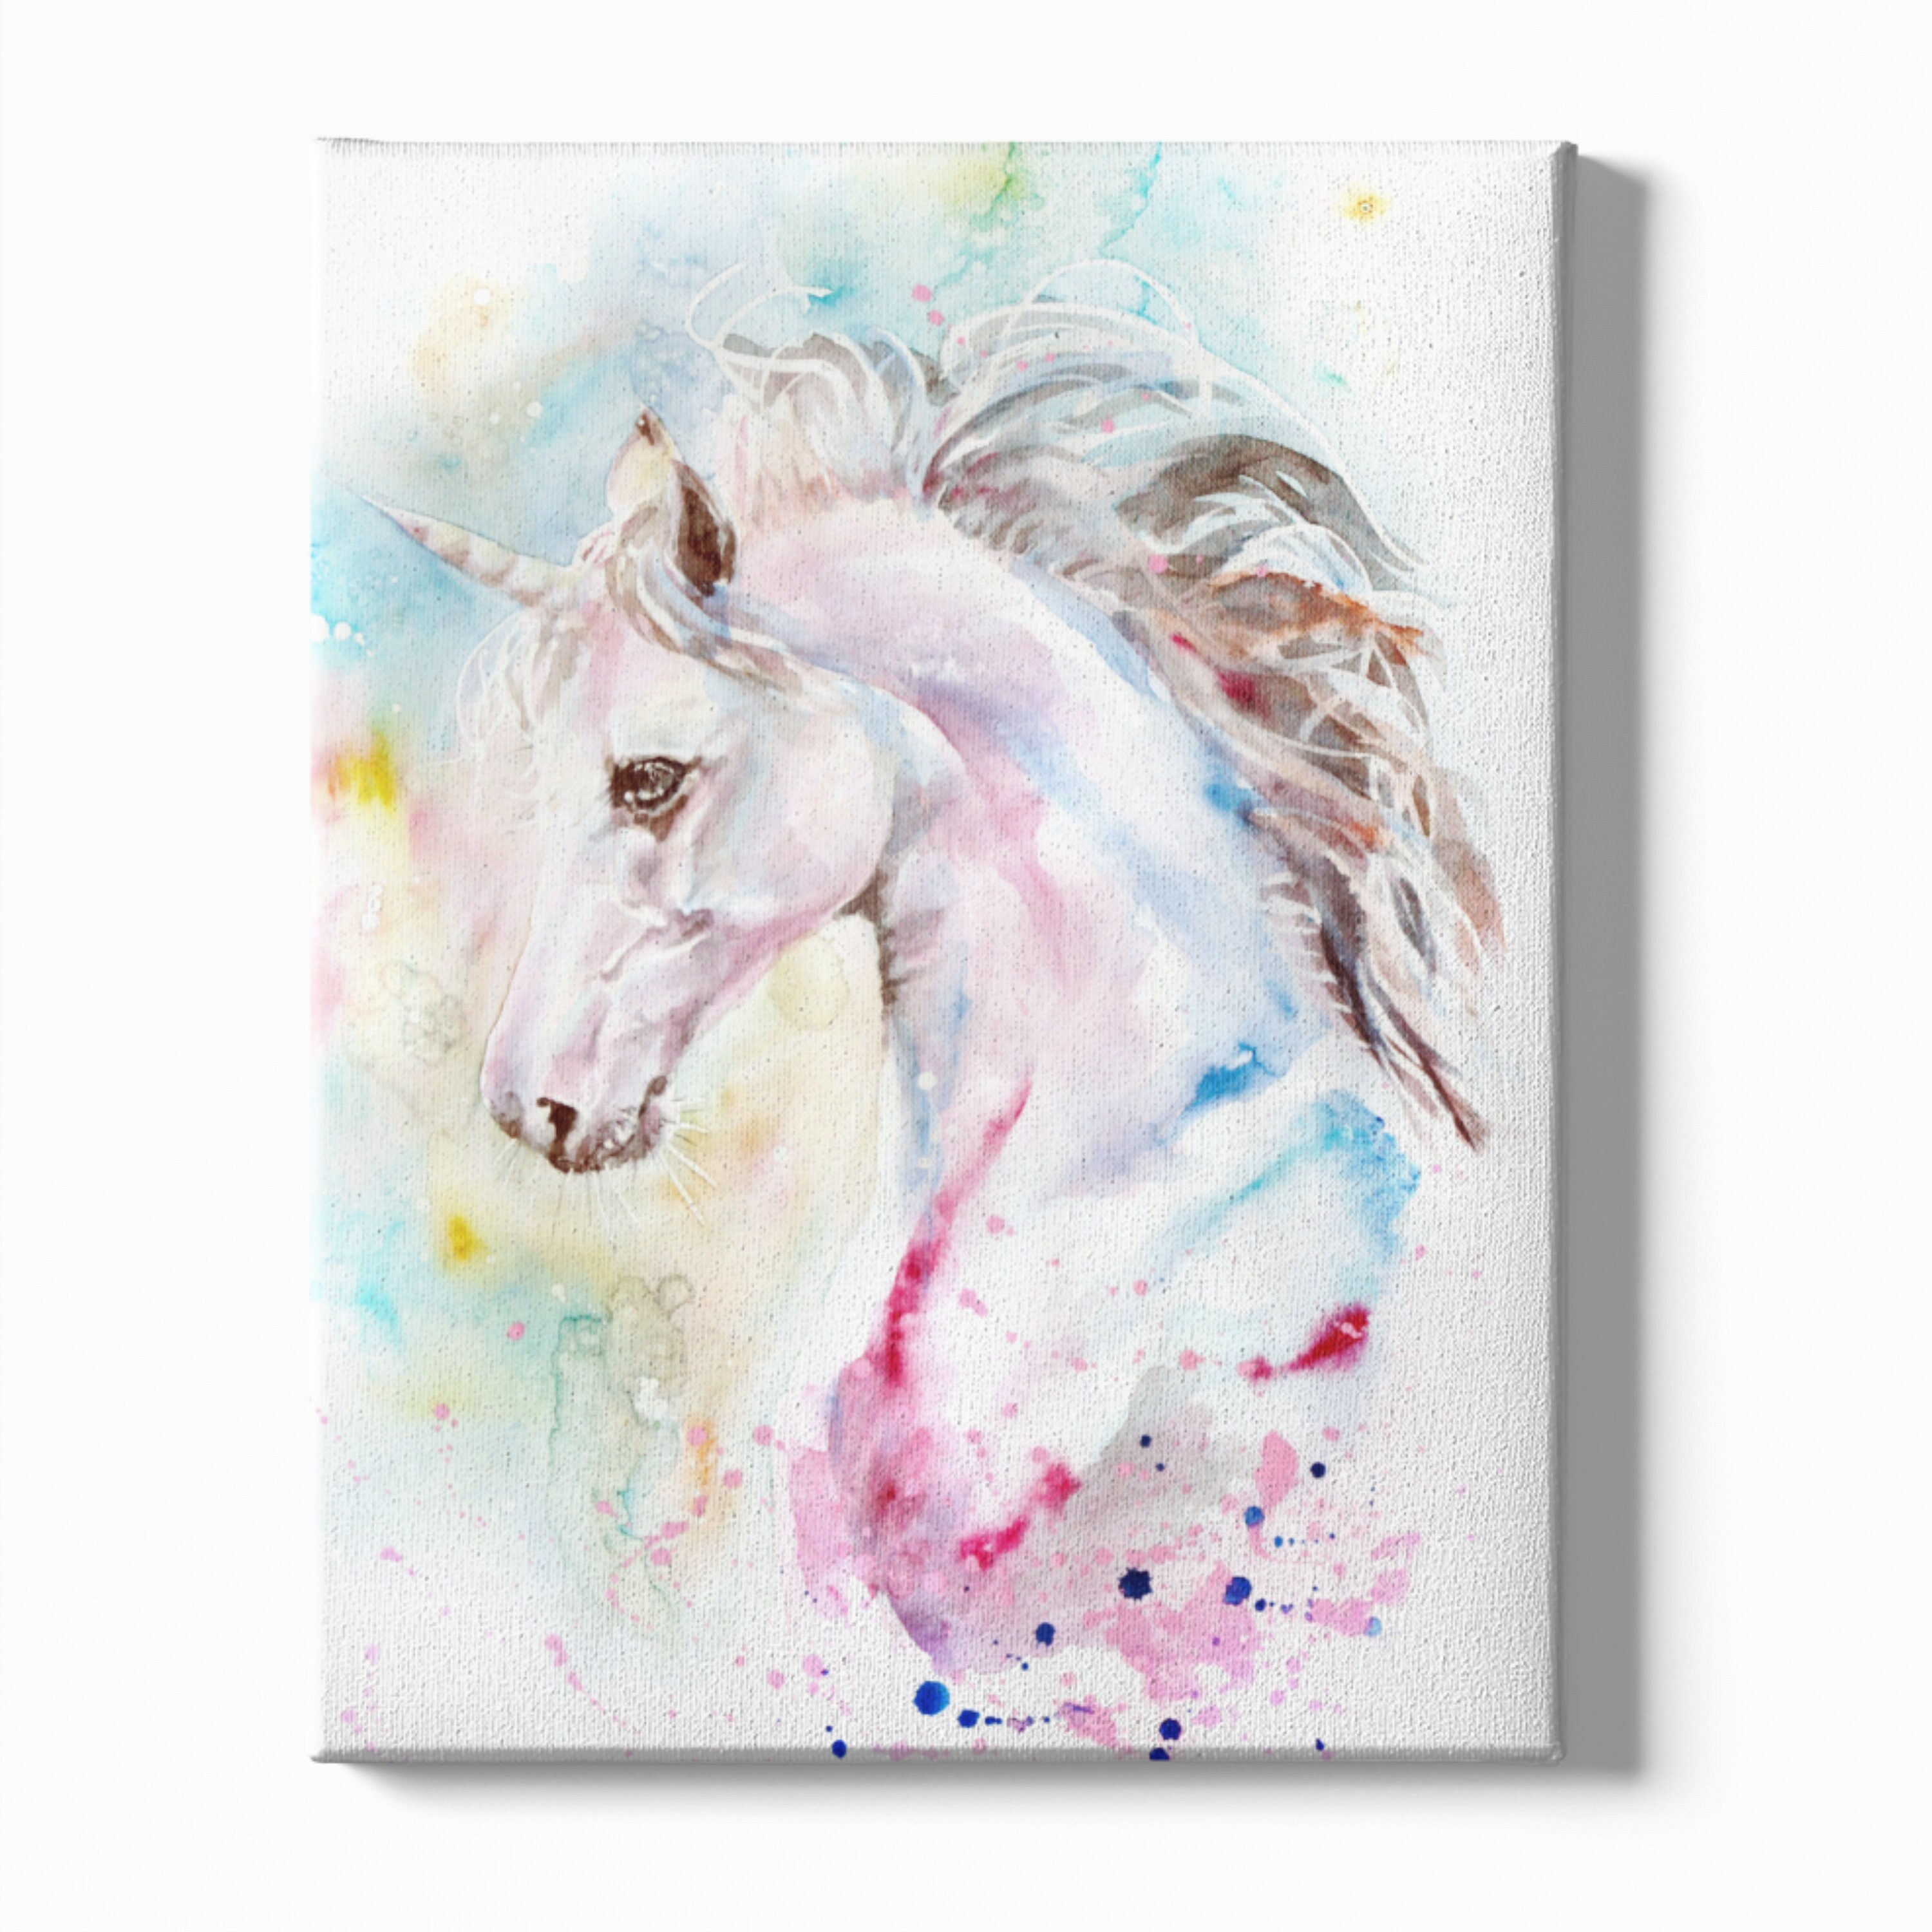 Enchanting Unicorn Art Box: A Magical Collection of Colorful Possibili